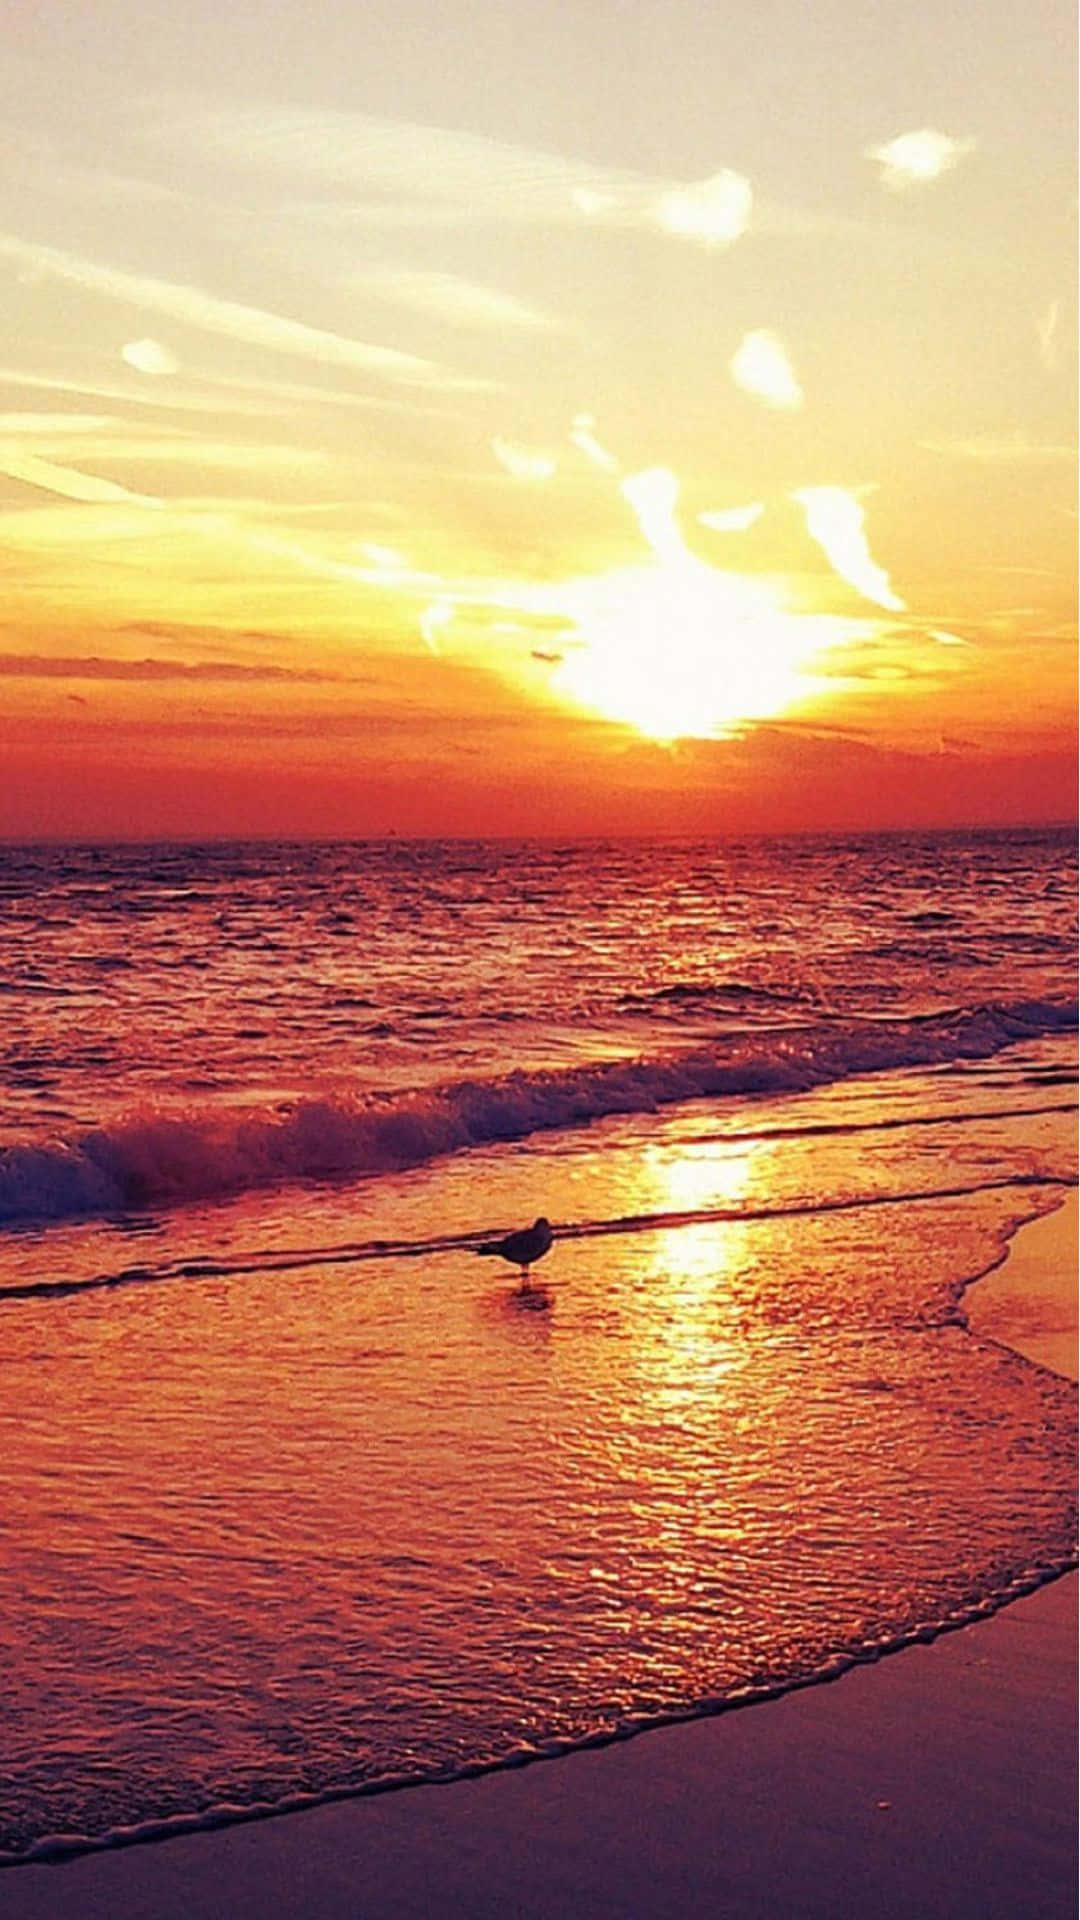 Enjoy a stunning sunset at the beach with your iPhone Wallpaper